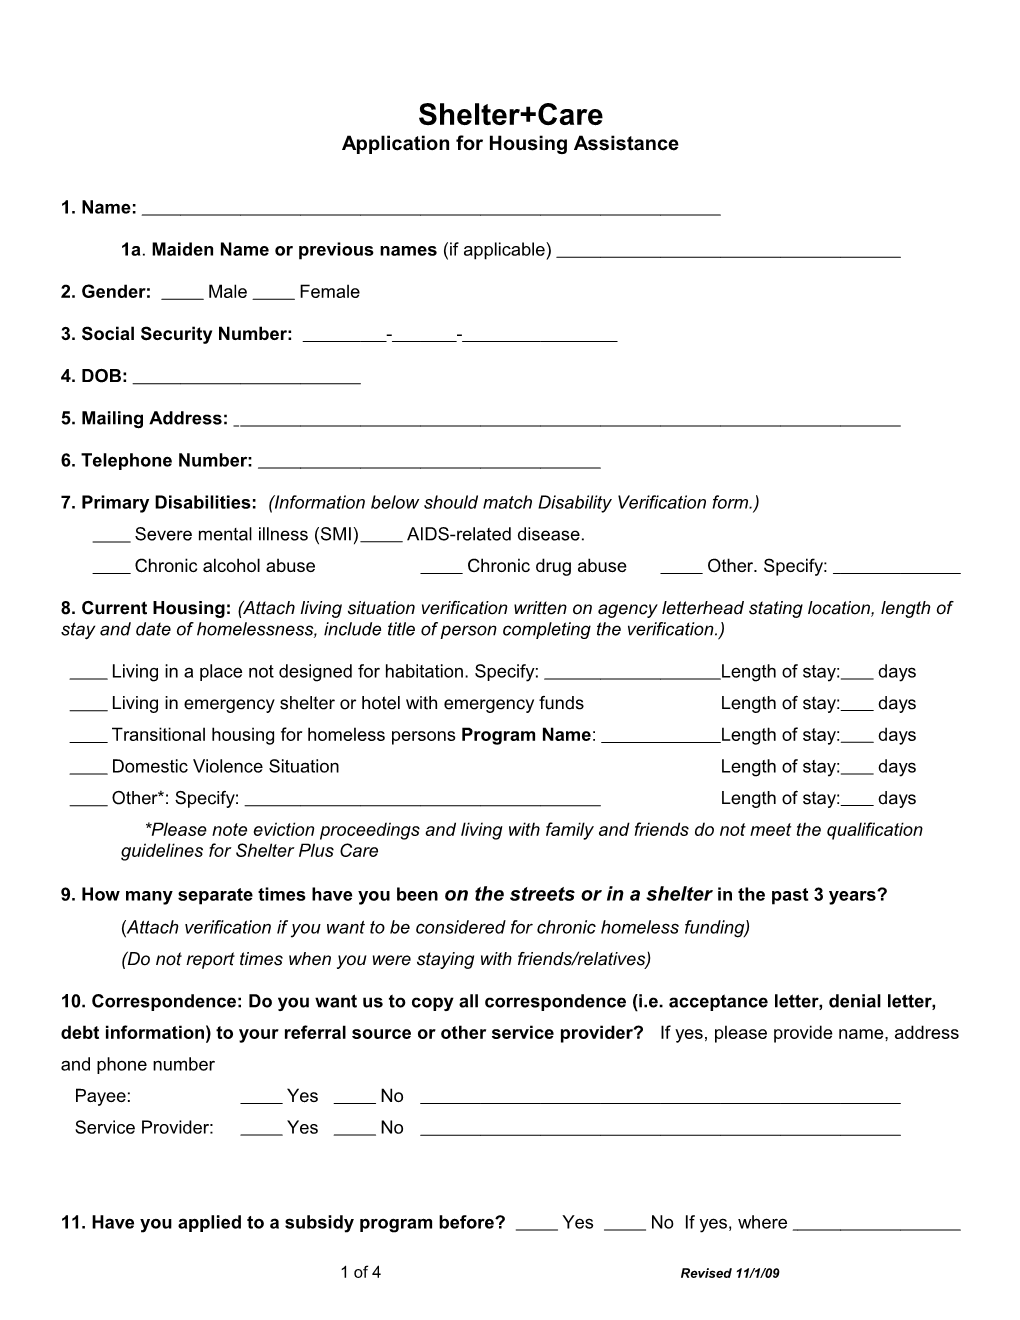 Application for Housing Assistance